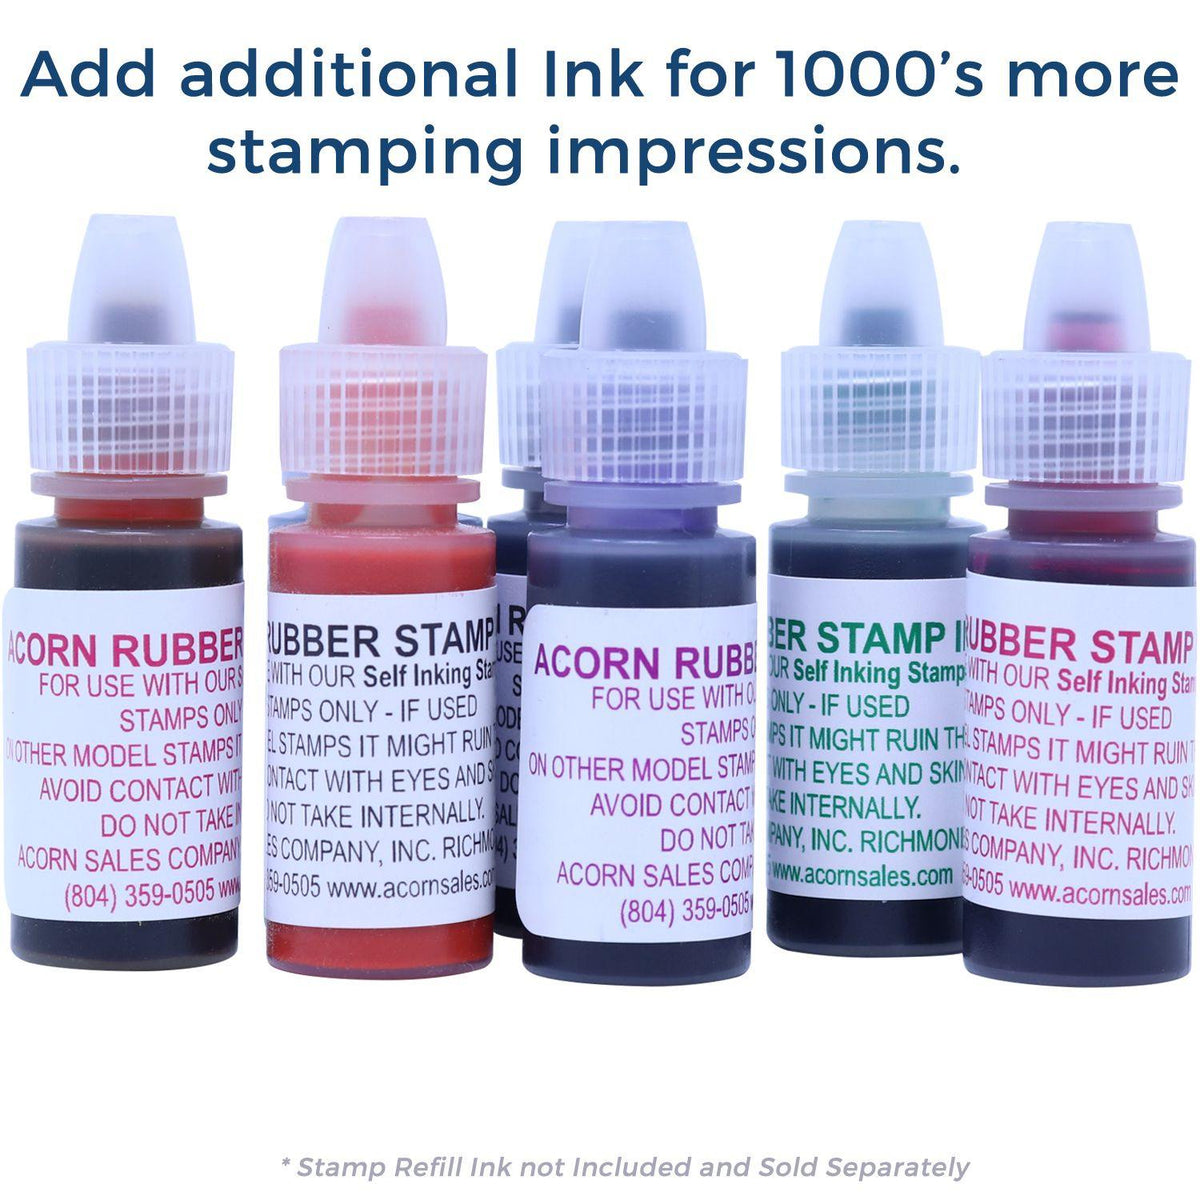 Refill Inks for Large Pre-Inked Narrow Font Cancelled Stamp Available